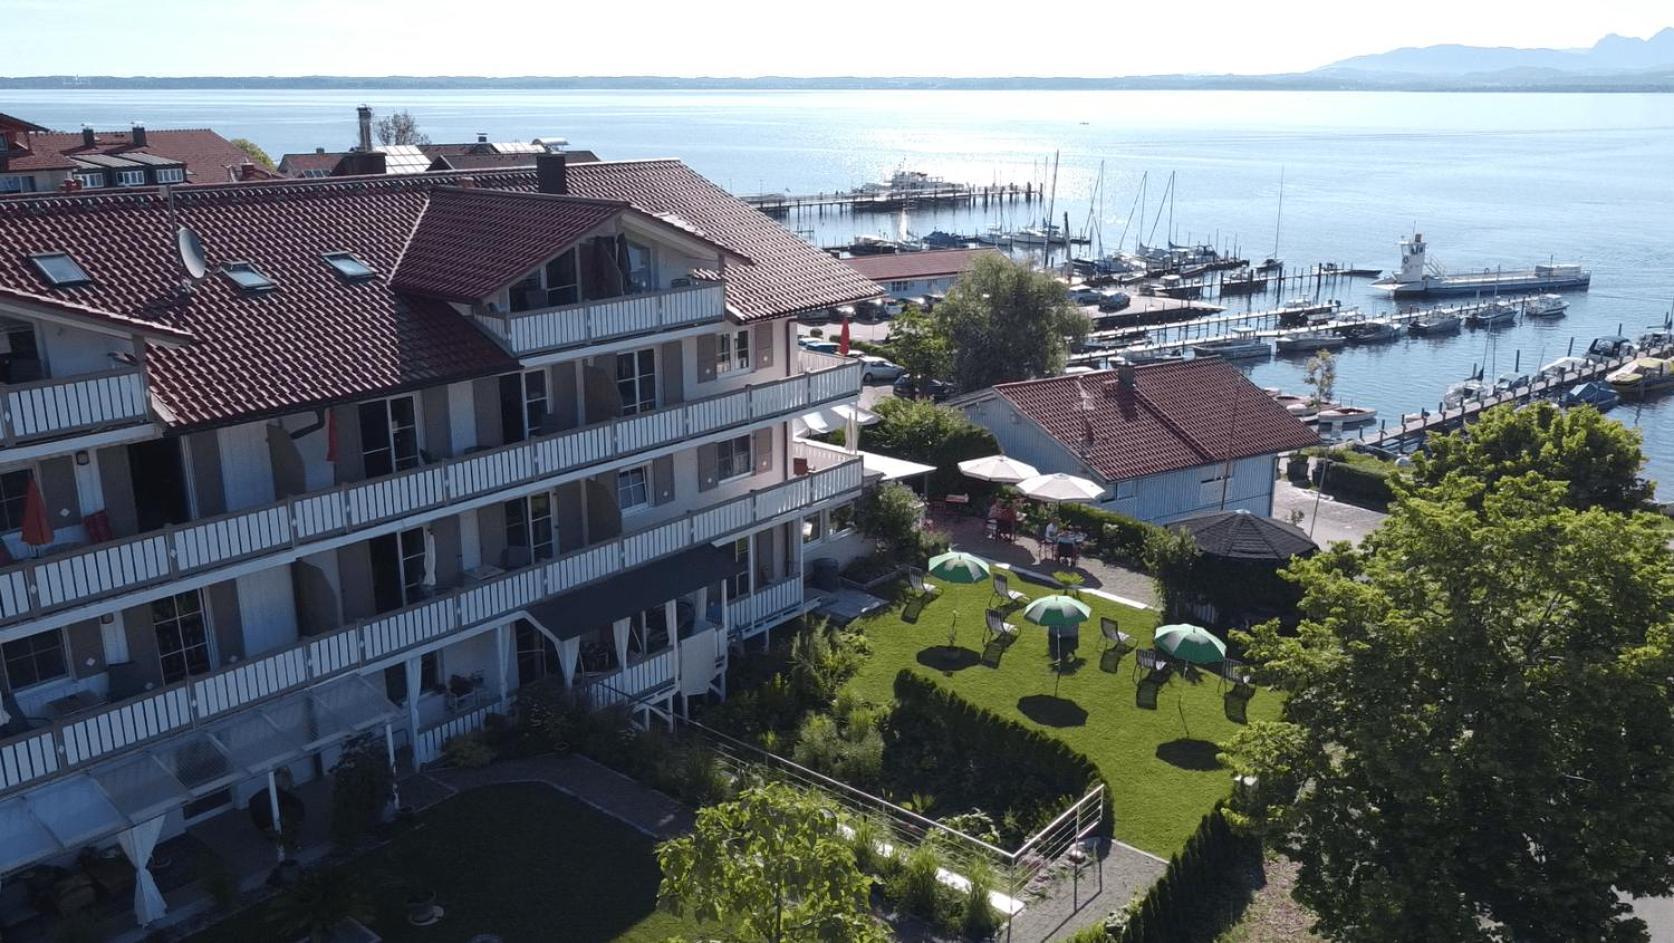 Chiemseestern Vacation & Recreation "Adults Only" Gstadt am Chiemsee Ngoại thất bức ảnh